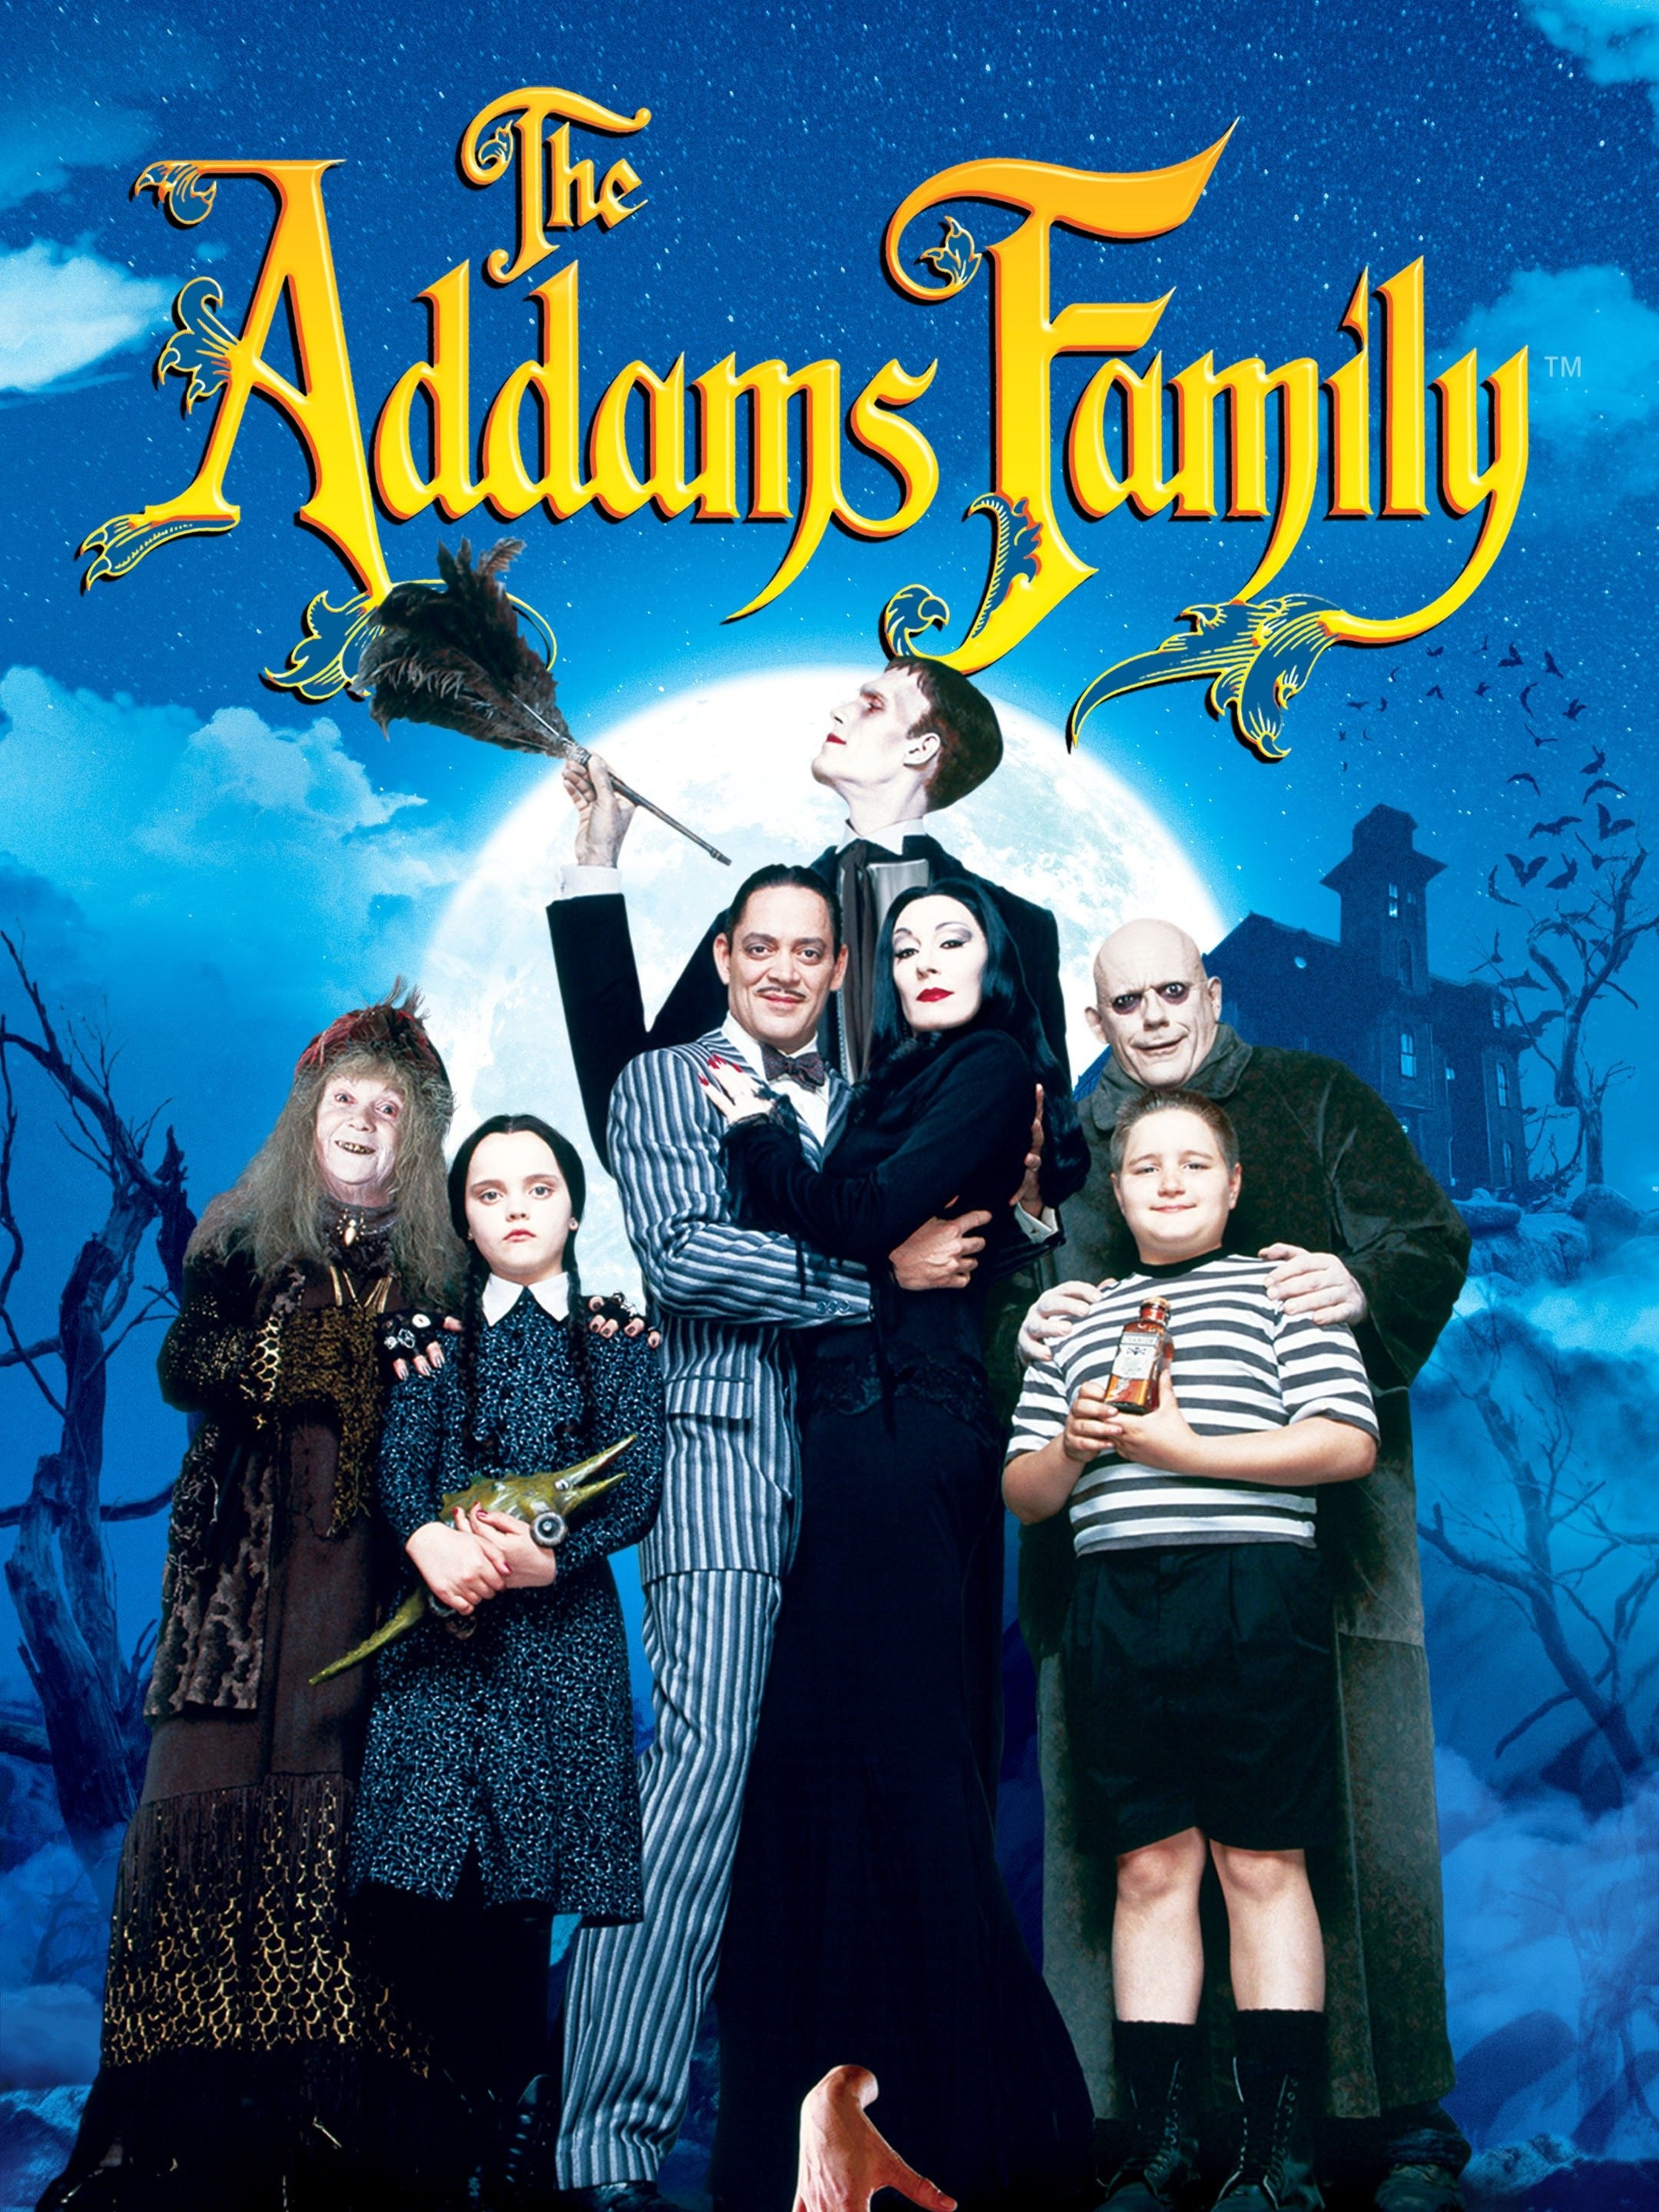 Wednesday Season 2 May Include These 3 Missing Addams Family Members